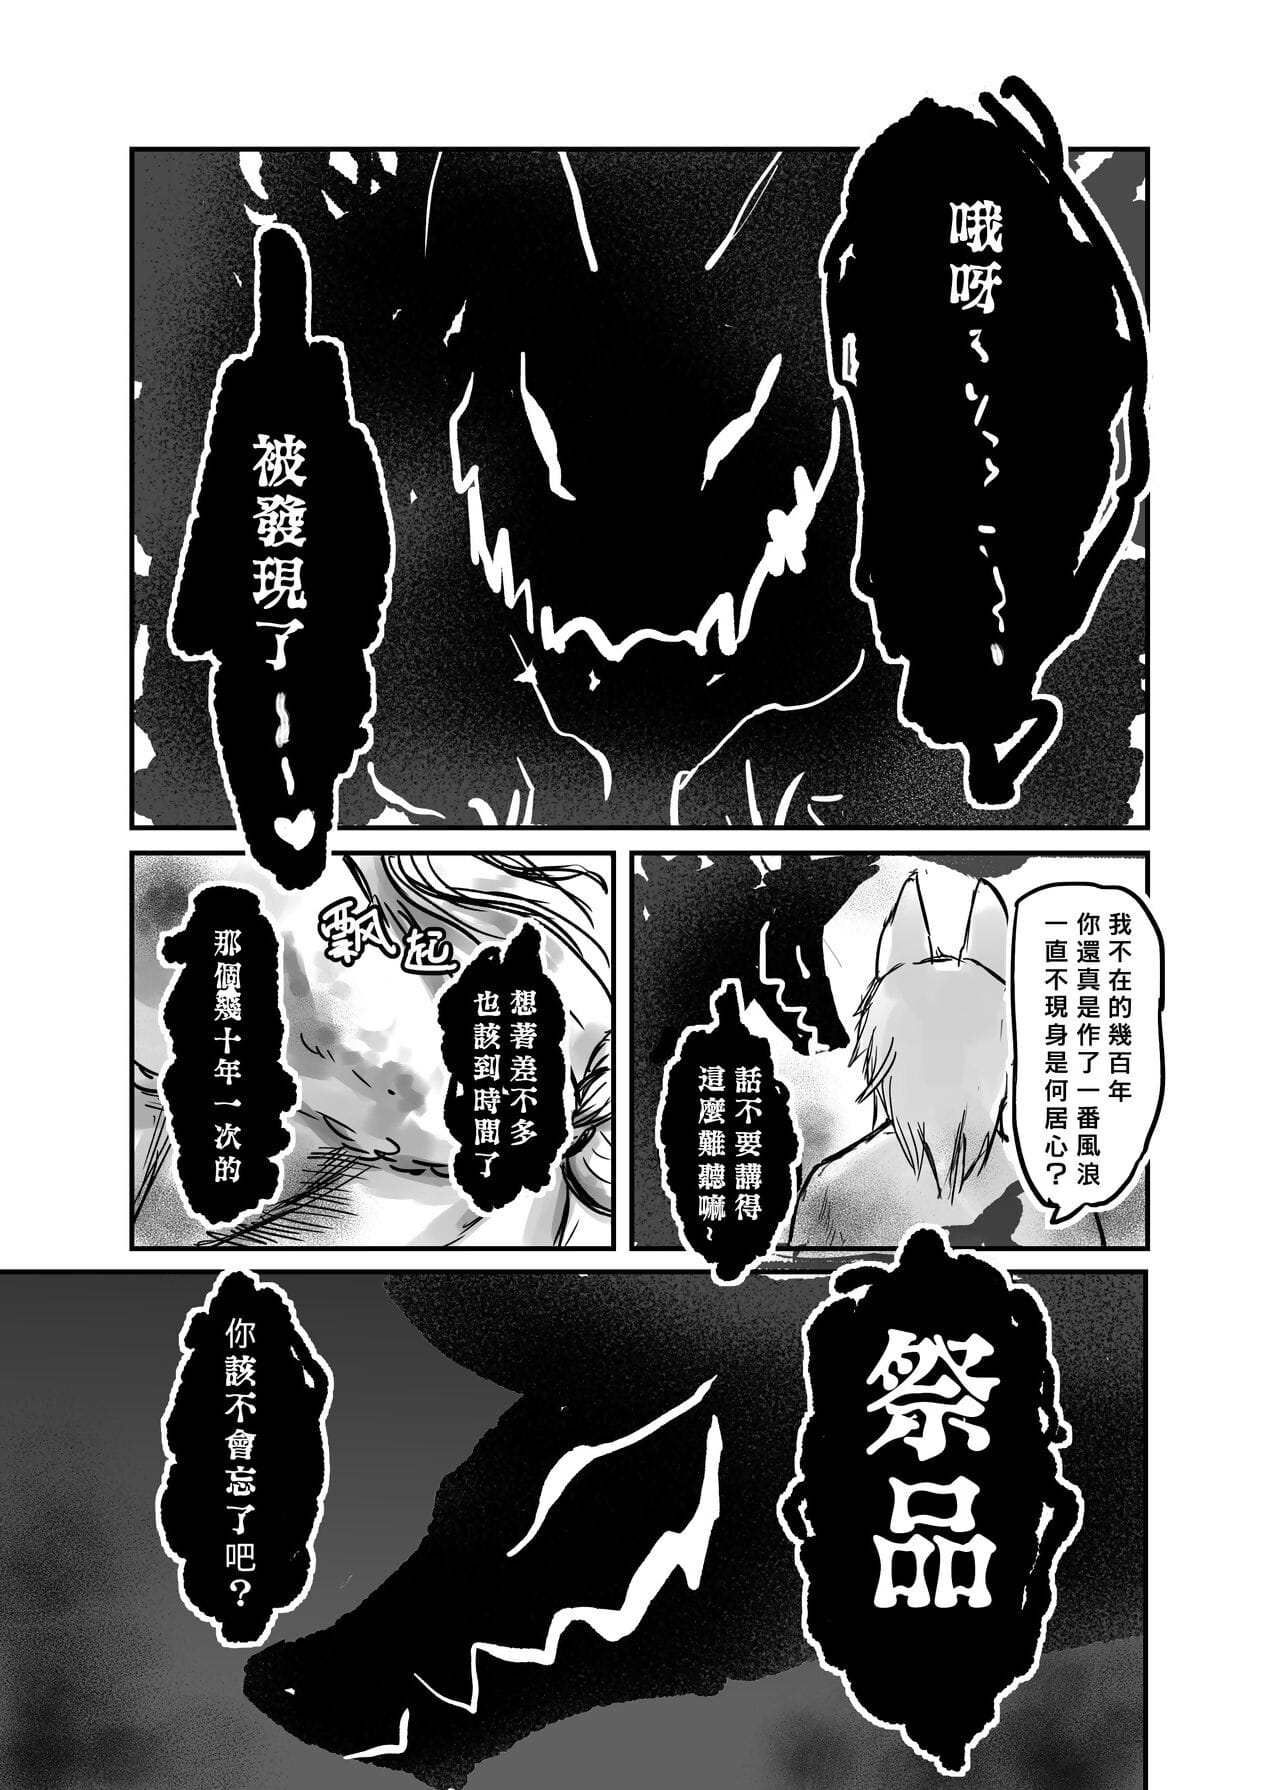 （The visitor 他乡之人 by：鬼流 - part 2 page 1